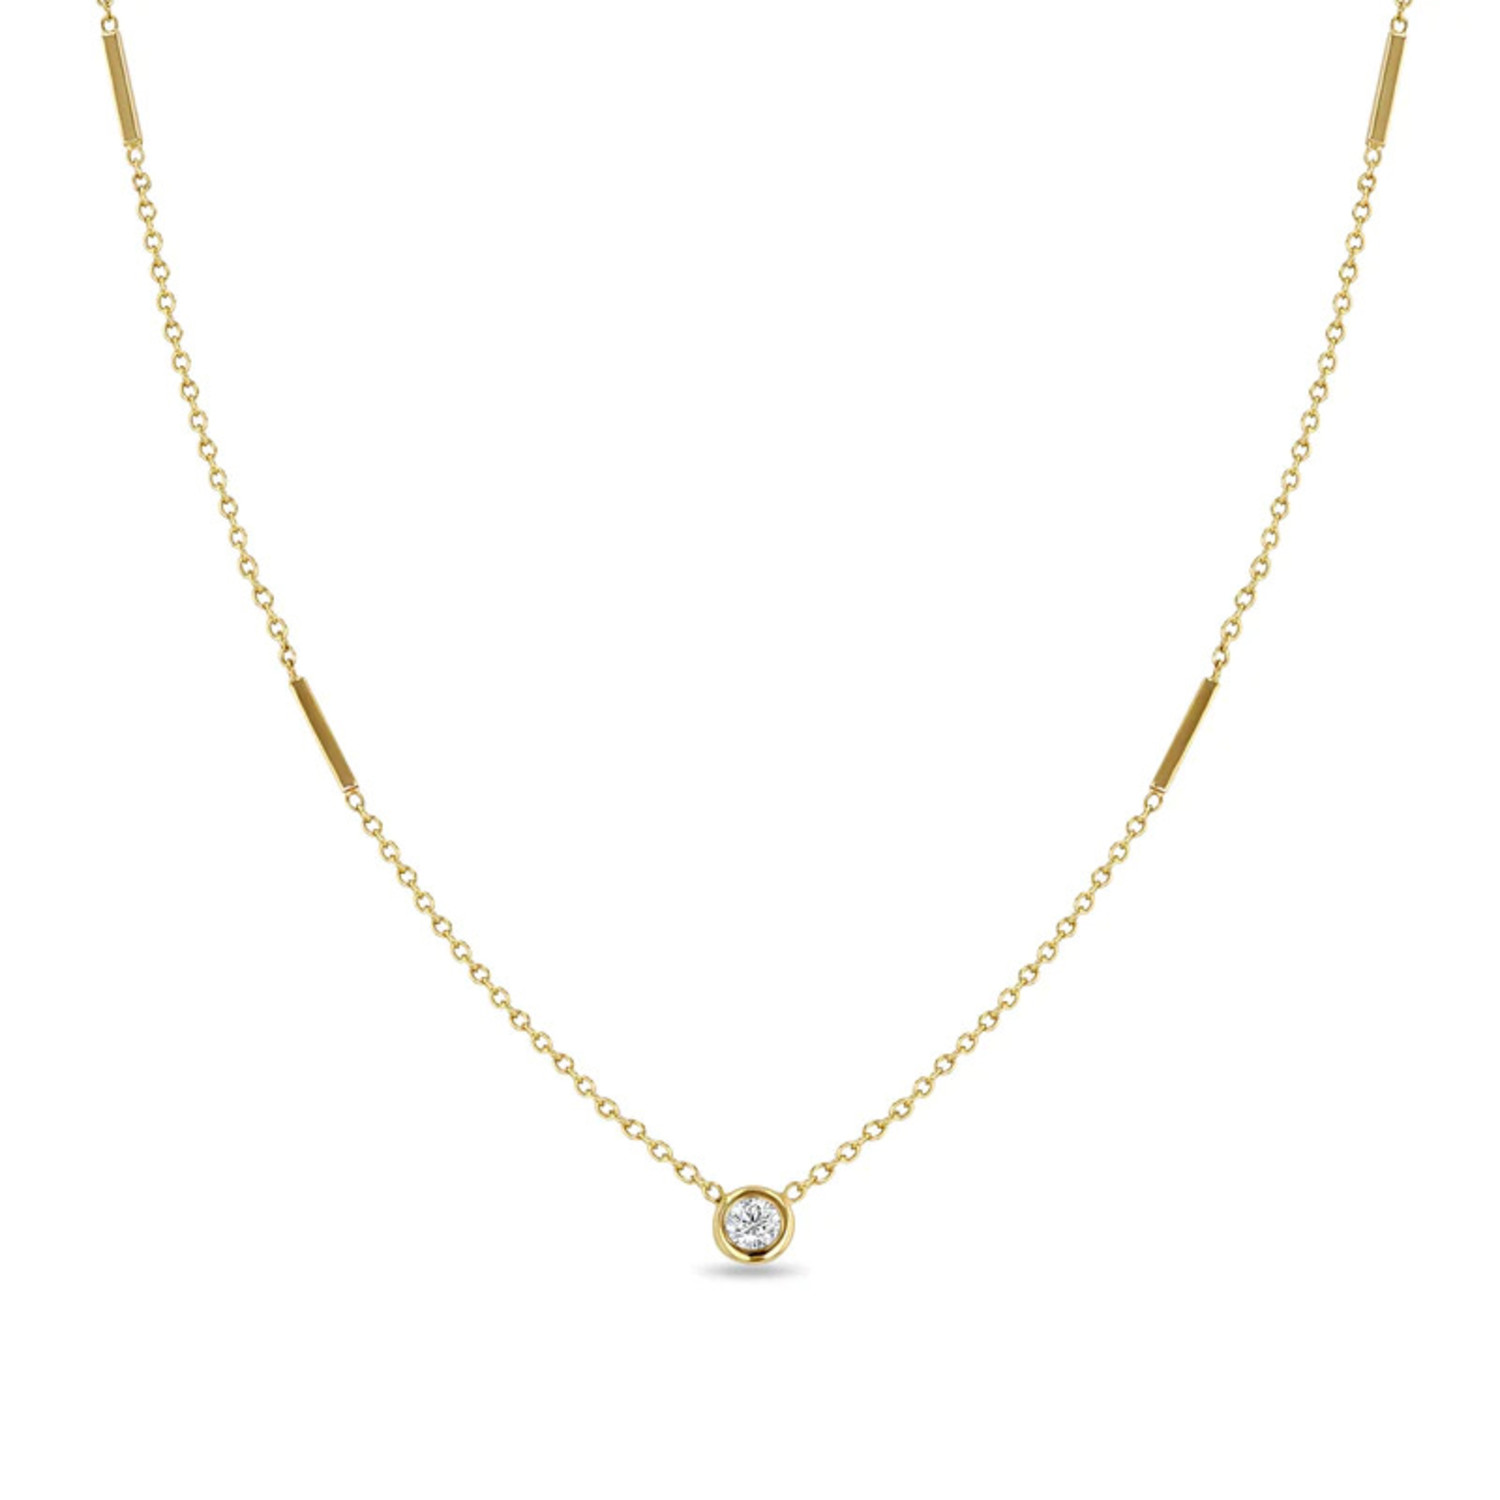 4 Horizontal Bars Necklace with a Floating Diamond in 14K Yellow Gold